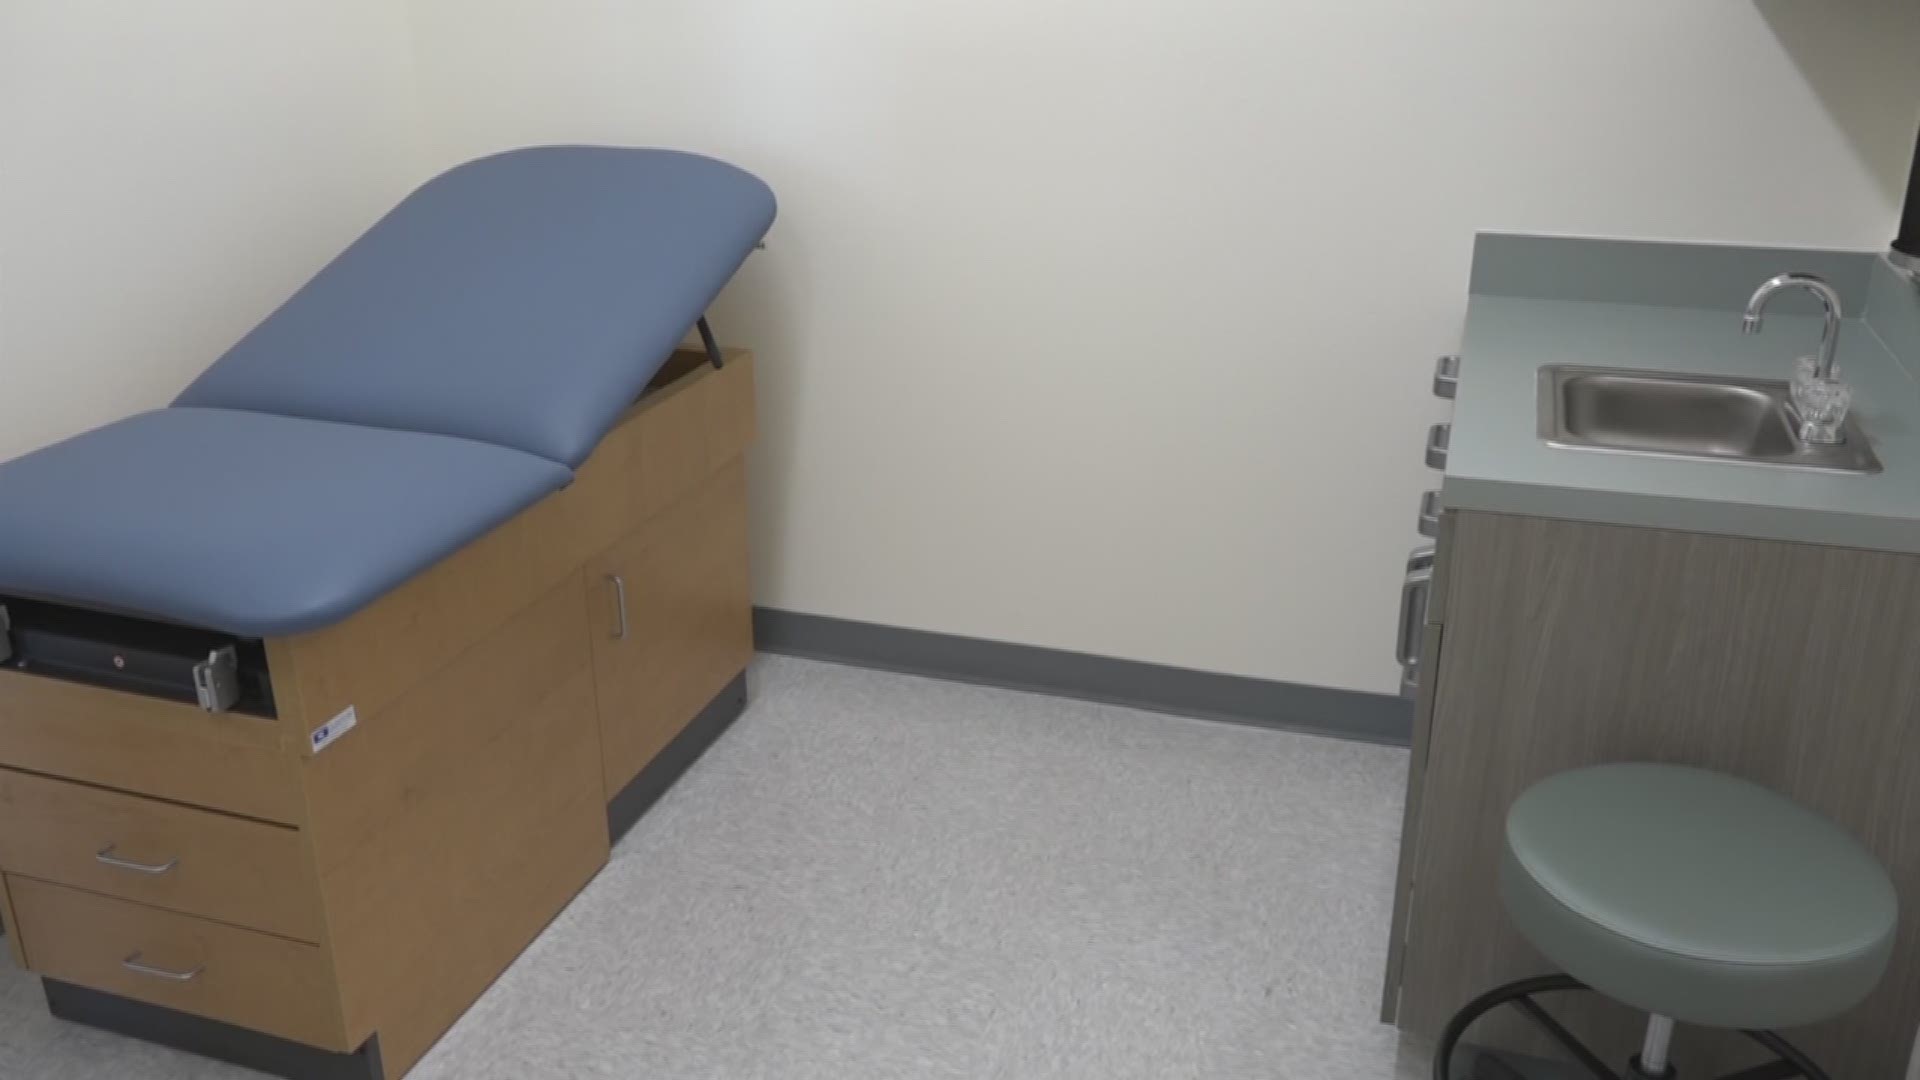 New mental health crisis center to save taxpayer money